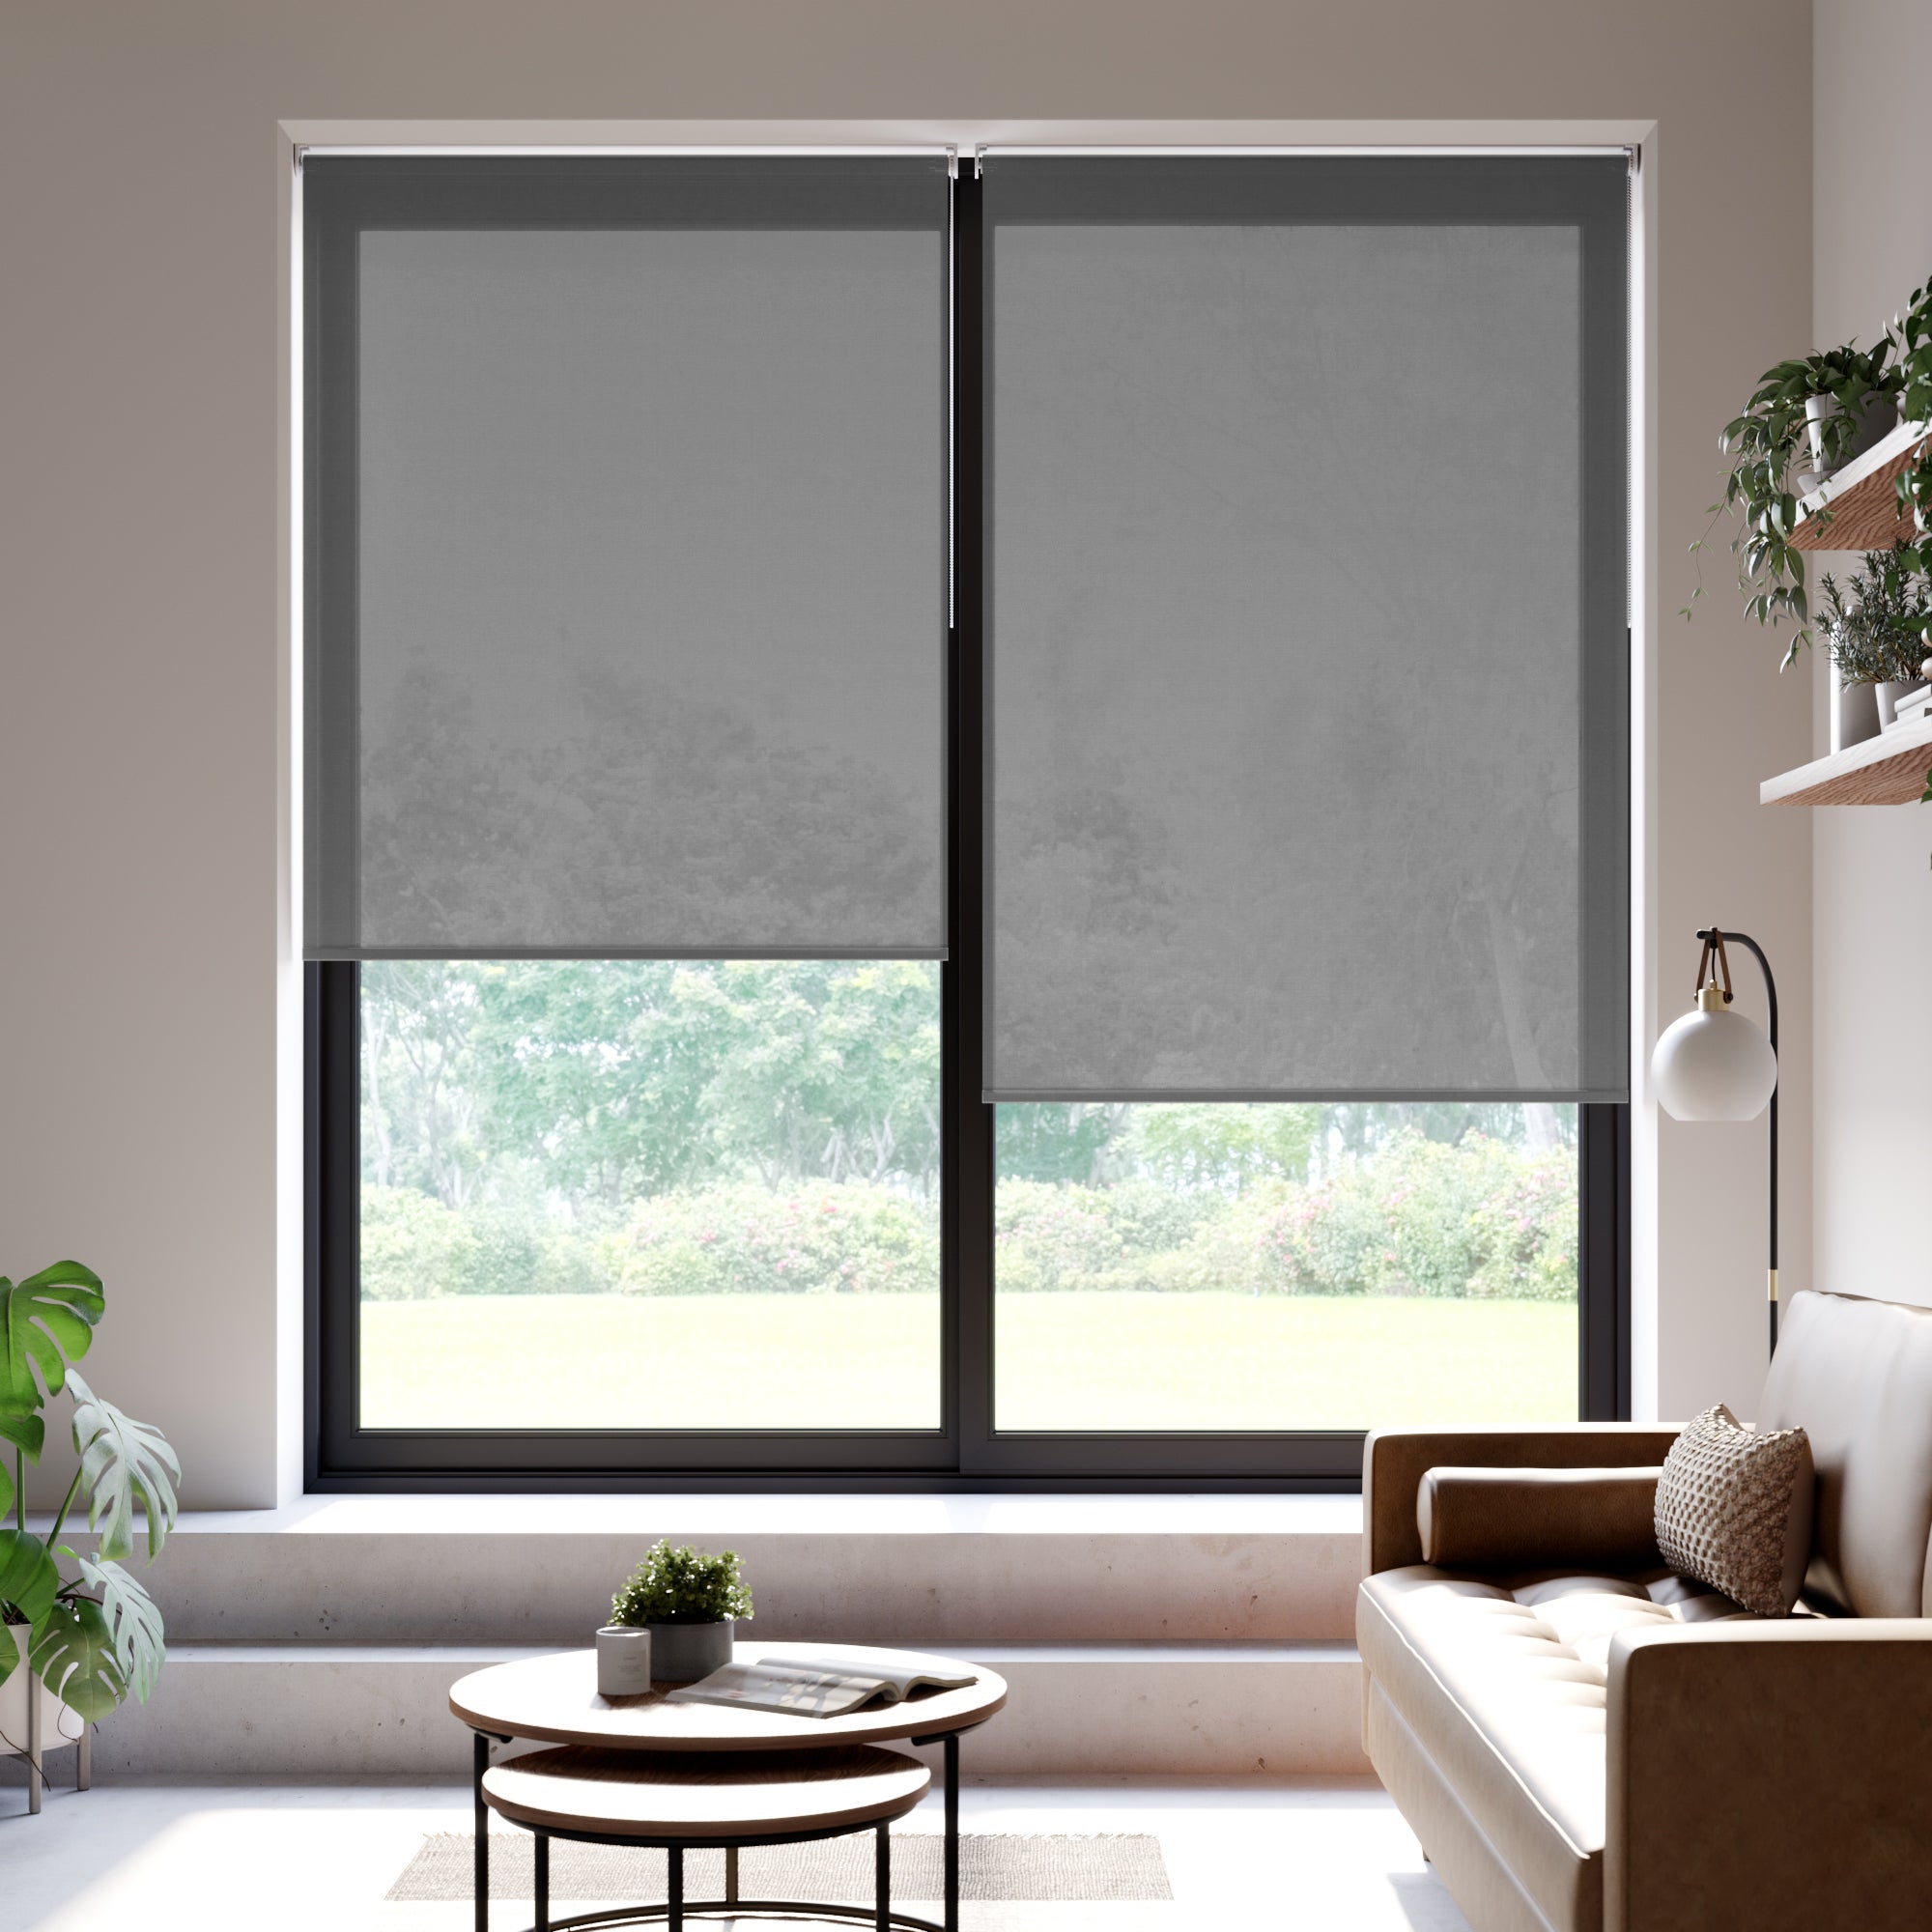 Voile Sheer Flame Retardant Made to Measure Roller Blind Fabric Sample Voile Moondust